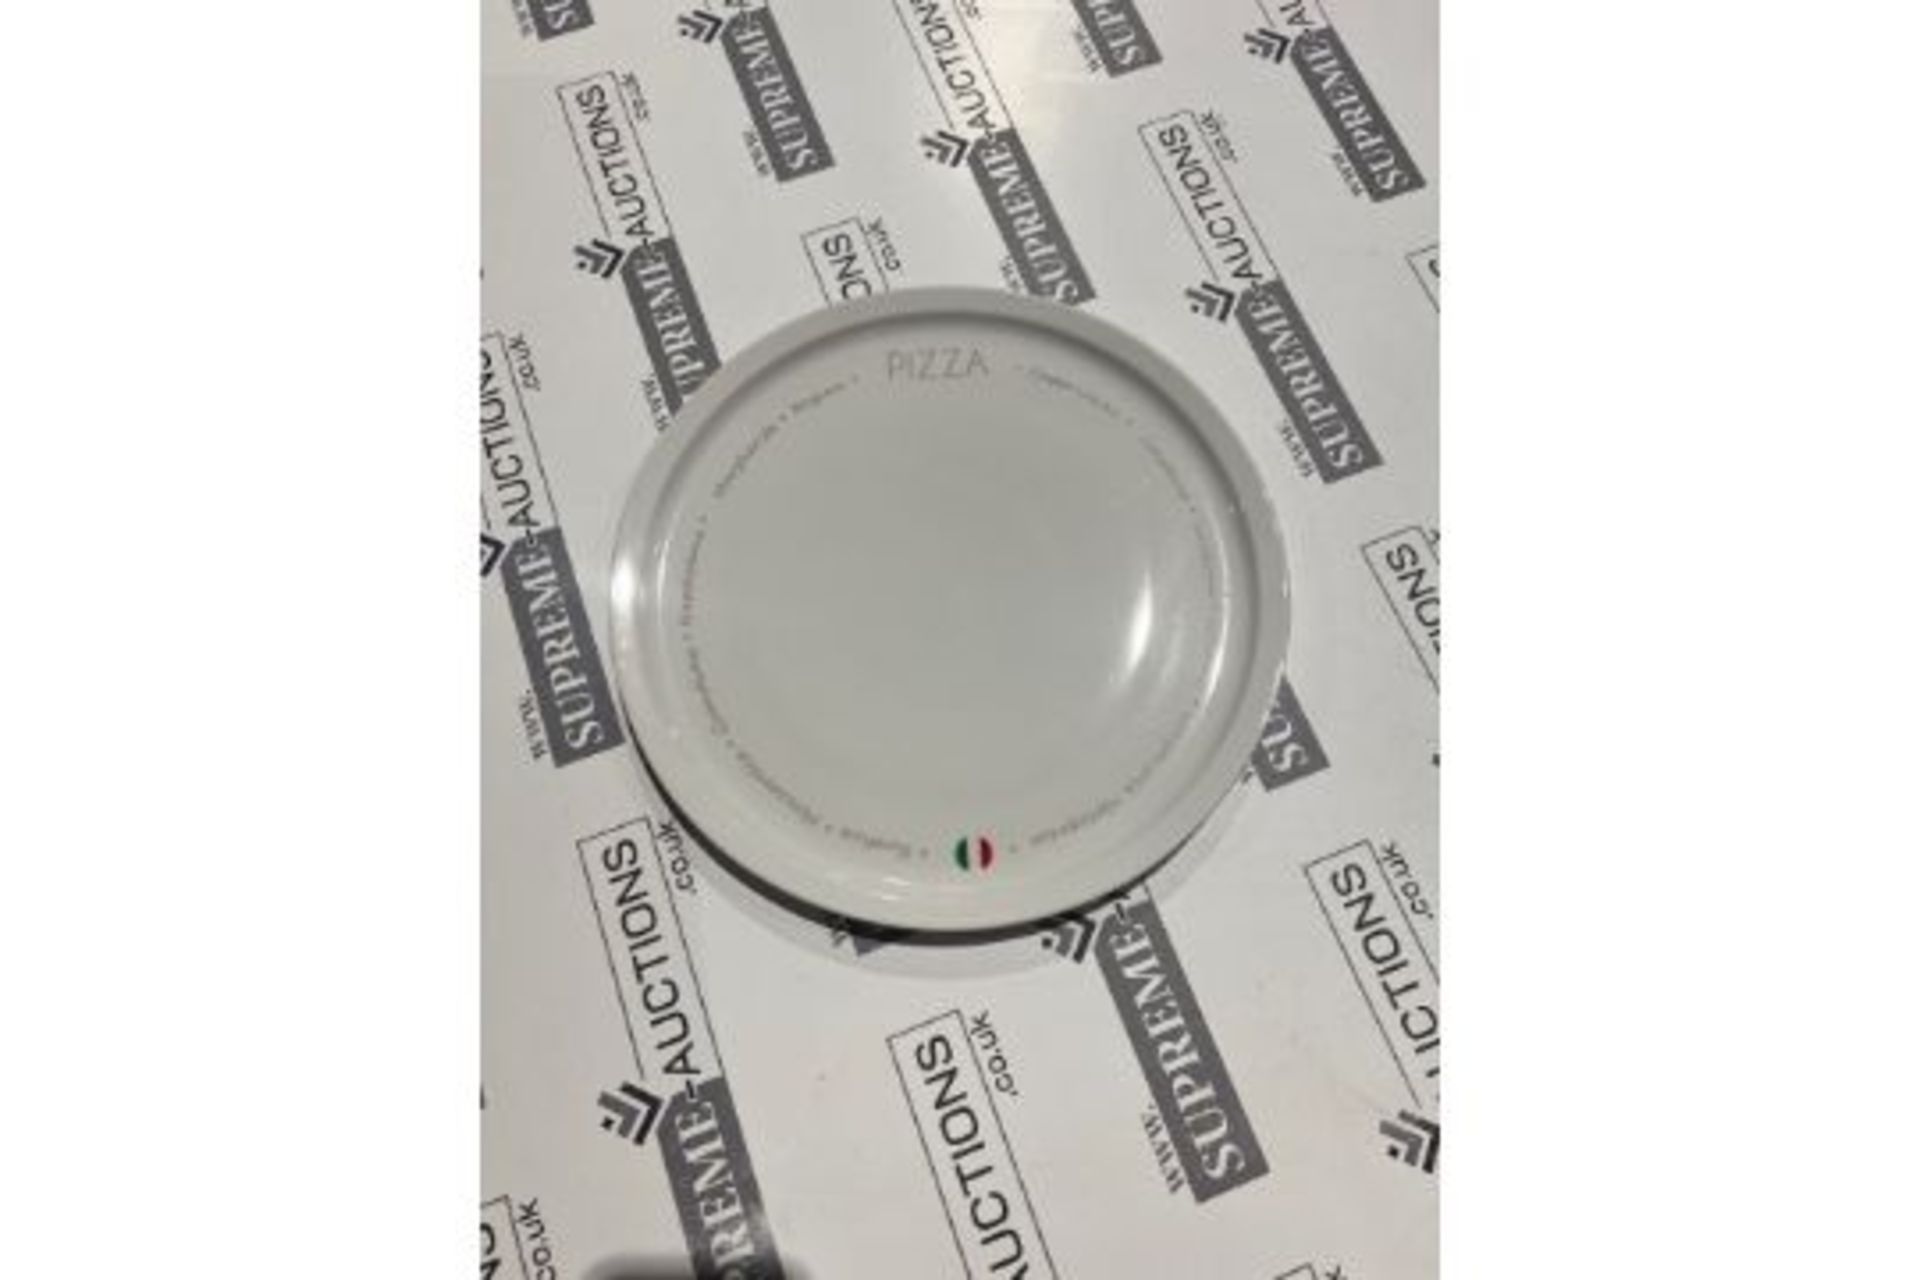 72 X BRAND NEW ARTMADIS NOVASTYL PIZZA ROUND PLATES WITH FLAG DETAIL, Dishwasher and microwavable